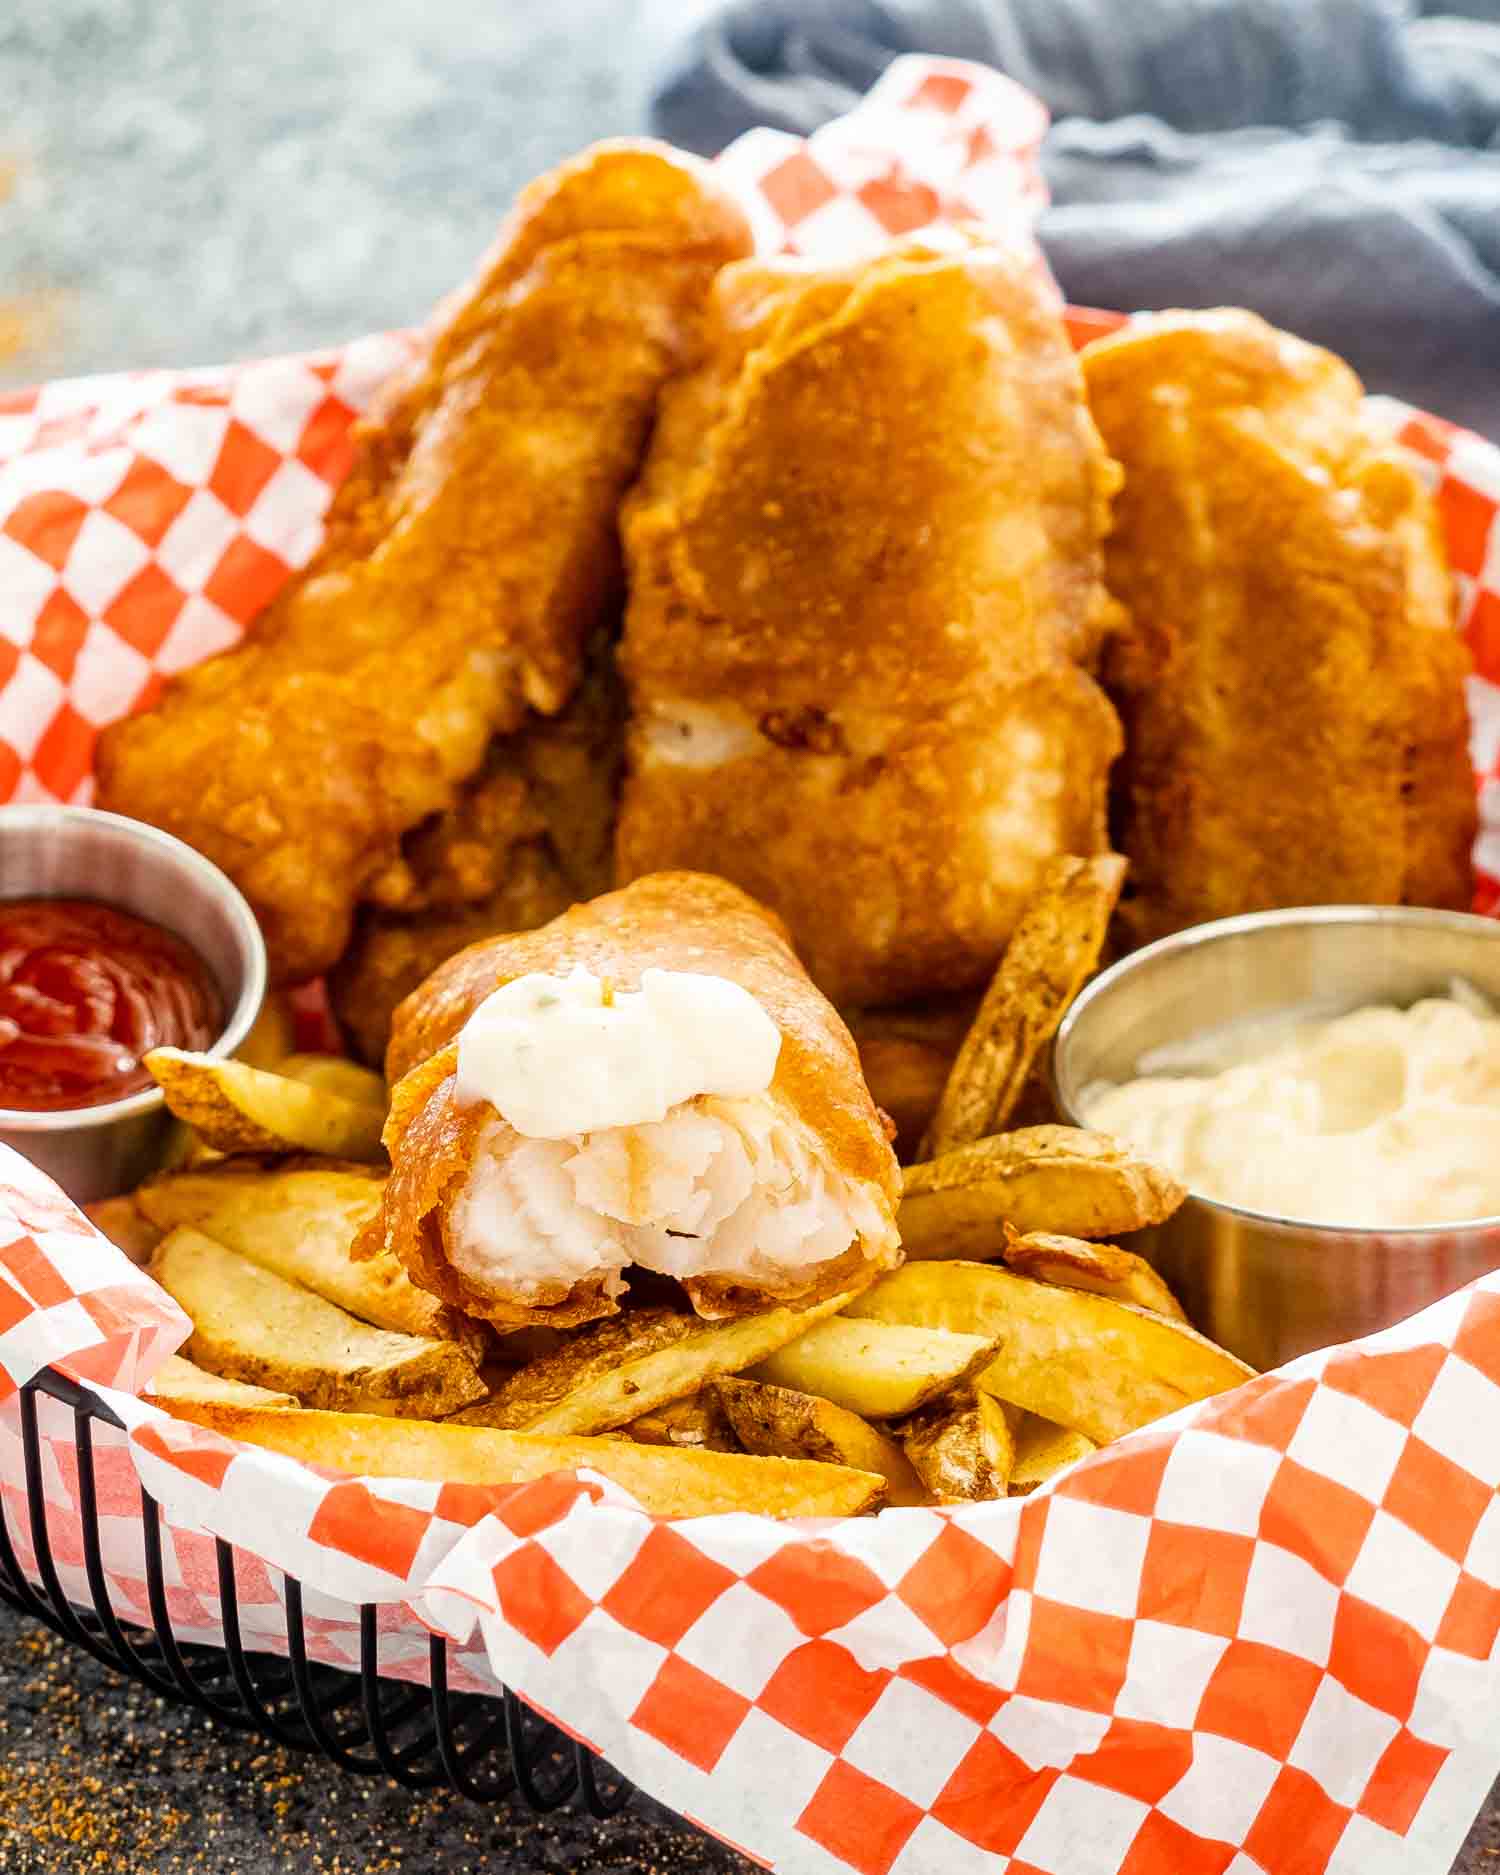 Fish and Chips Recipe: How to make Fish and Chips Recipe at Home